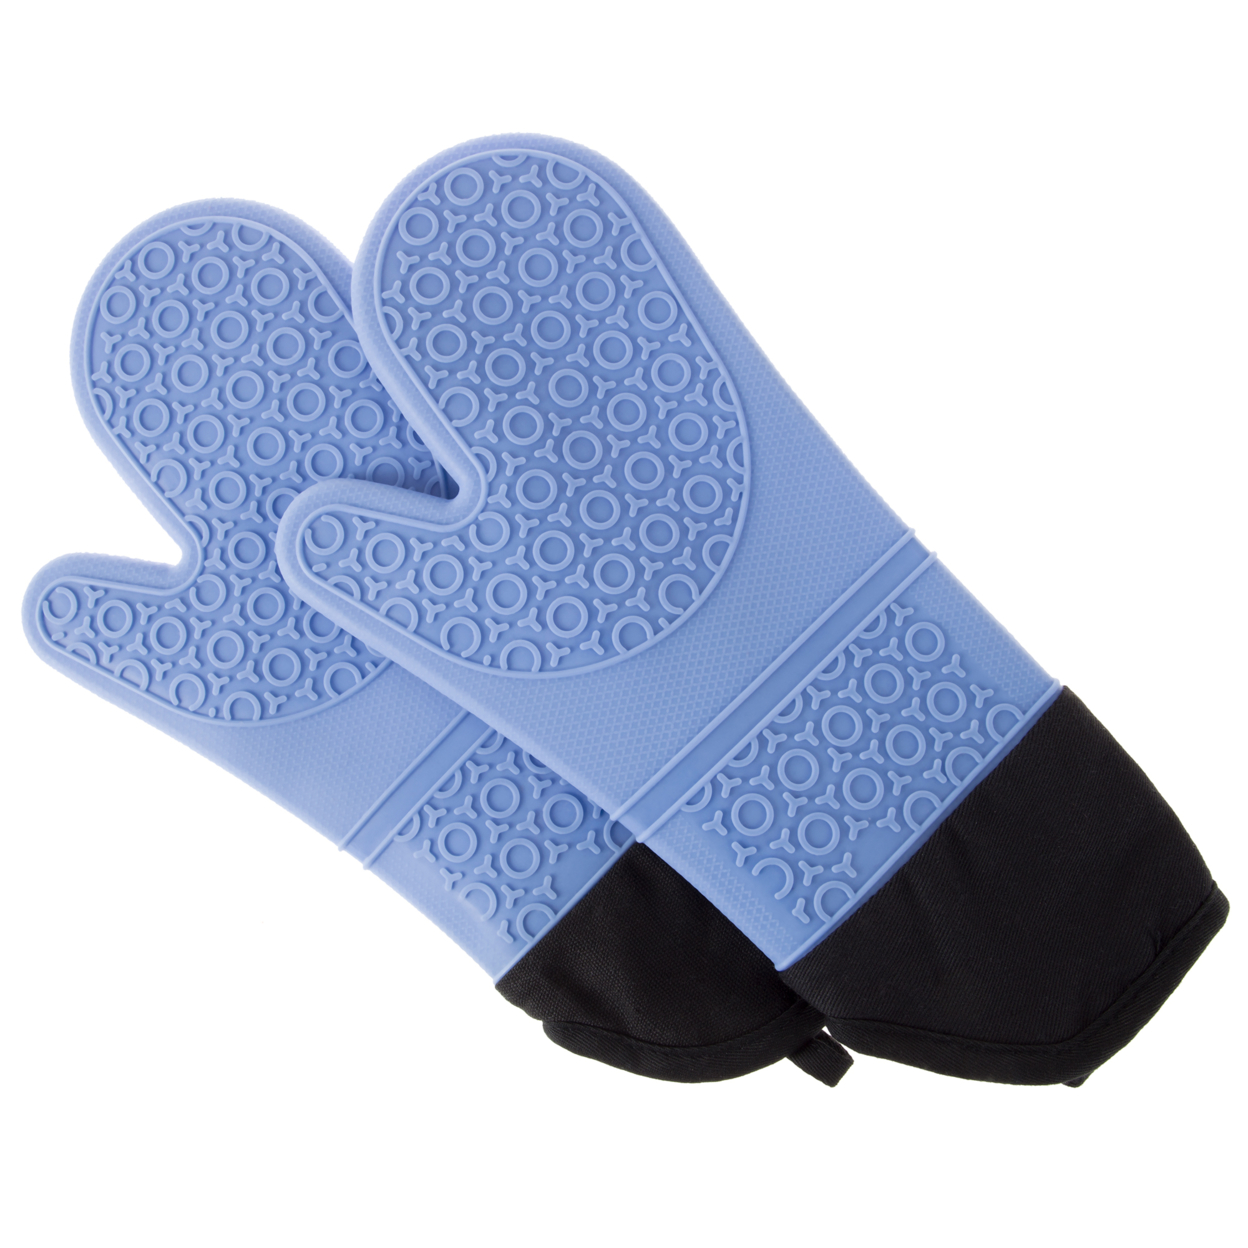 Silicone Oven Mits Extra Long Professional Quality Heat Resistant With Quilted Lining And 2-sided Textured Grip 1 Pair Blue